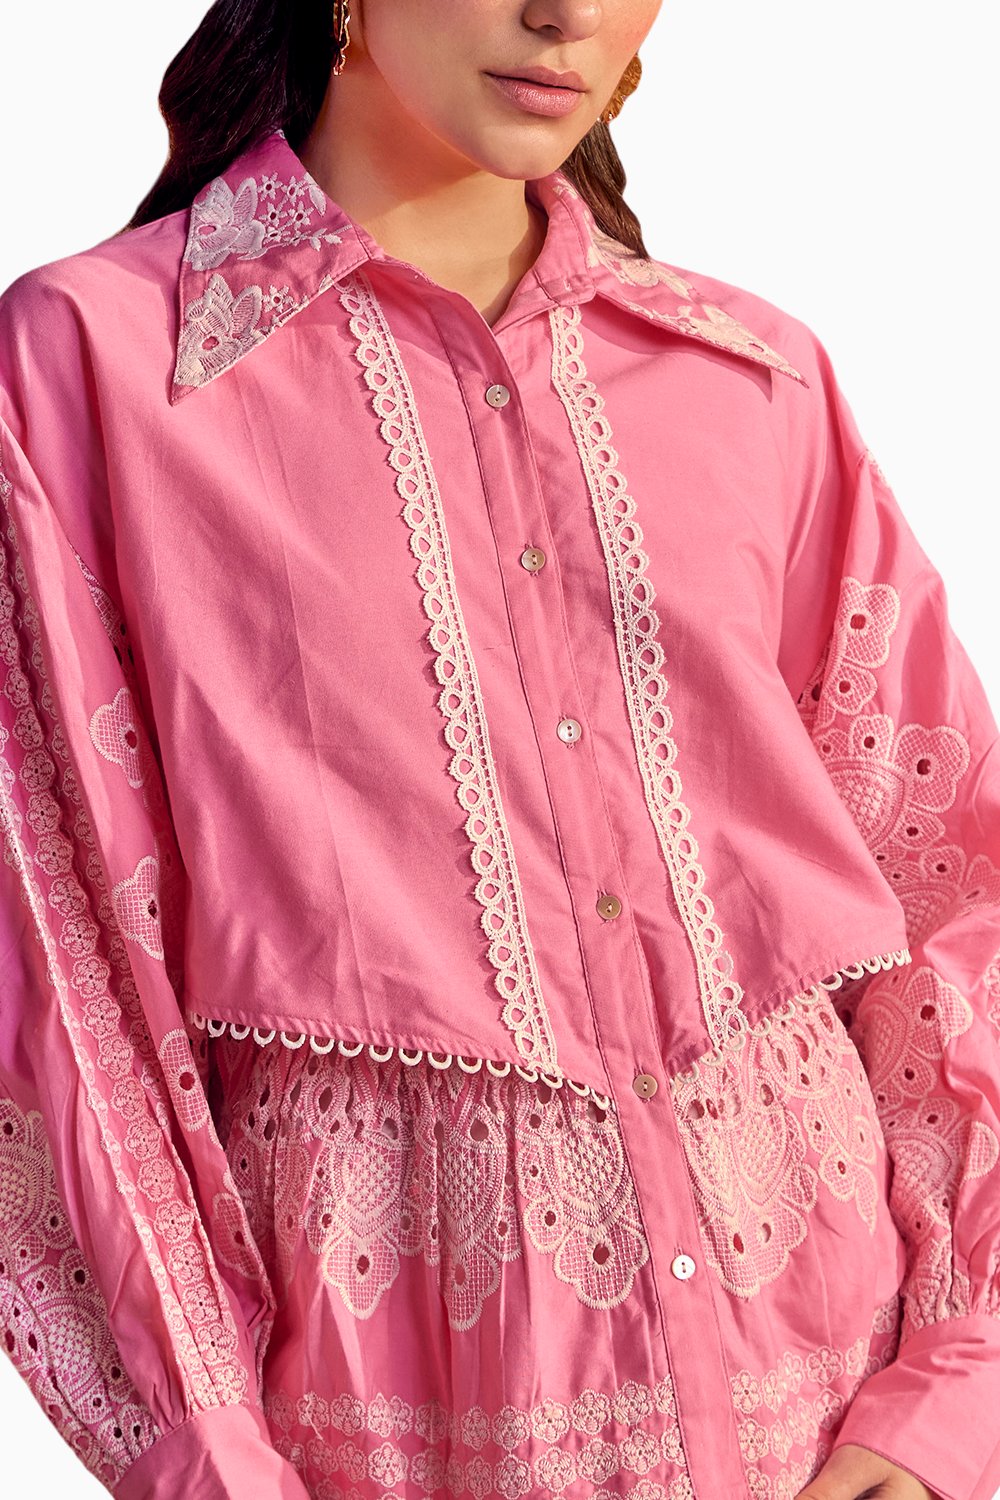 The Pink Cosmos Blouse